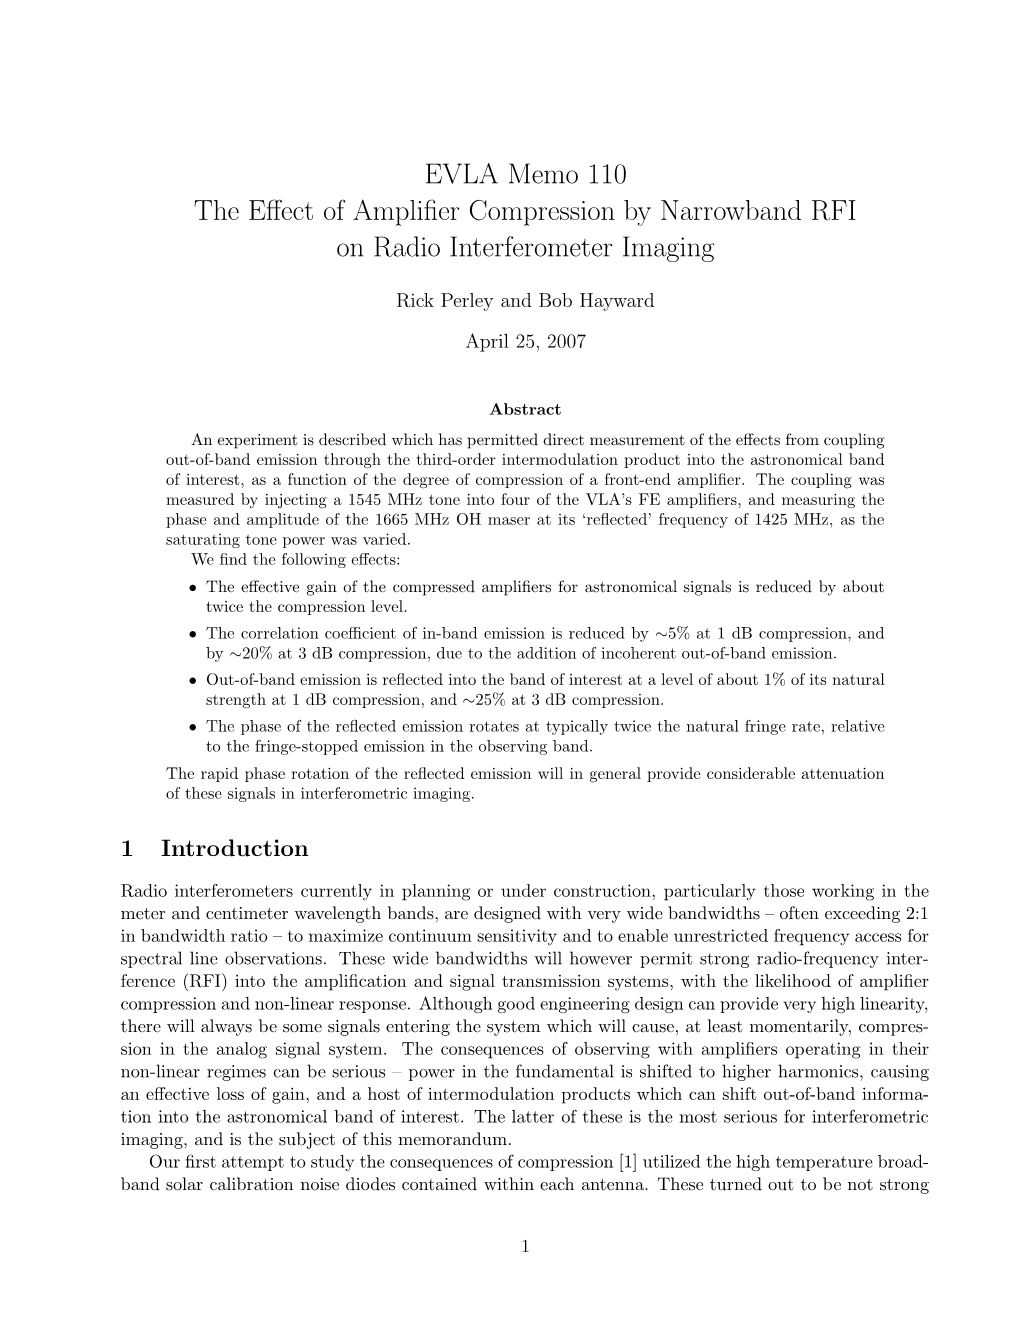 EVLA Memo 110 the Effect of Amplifier Compression By